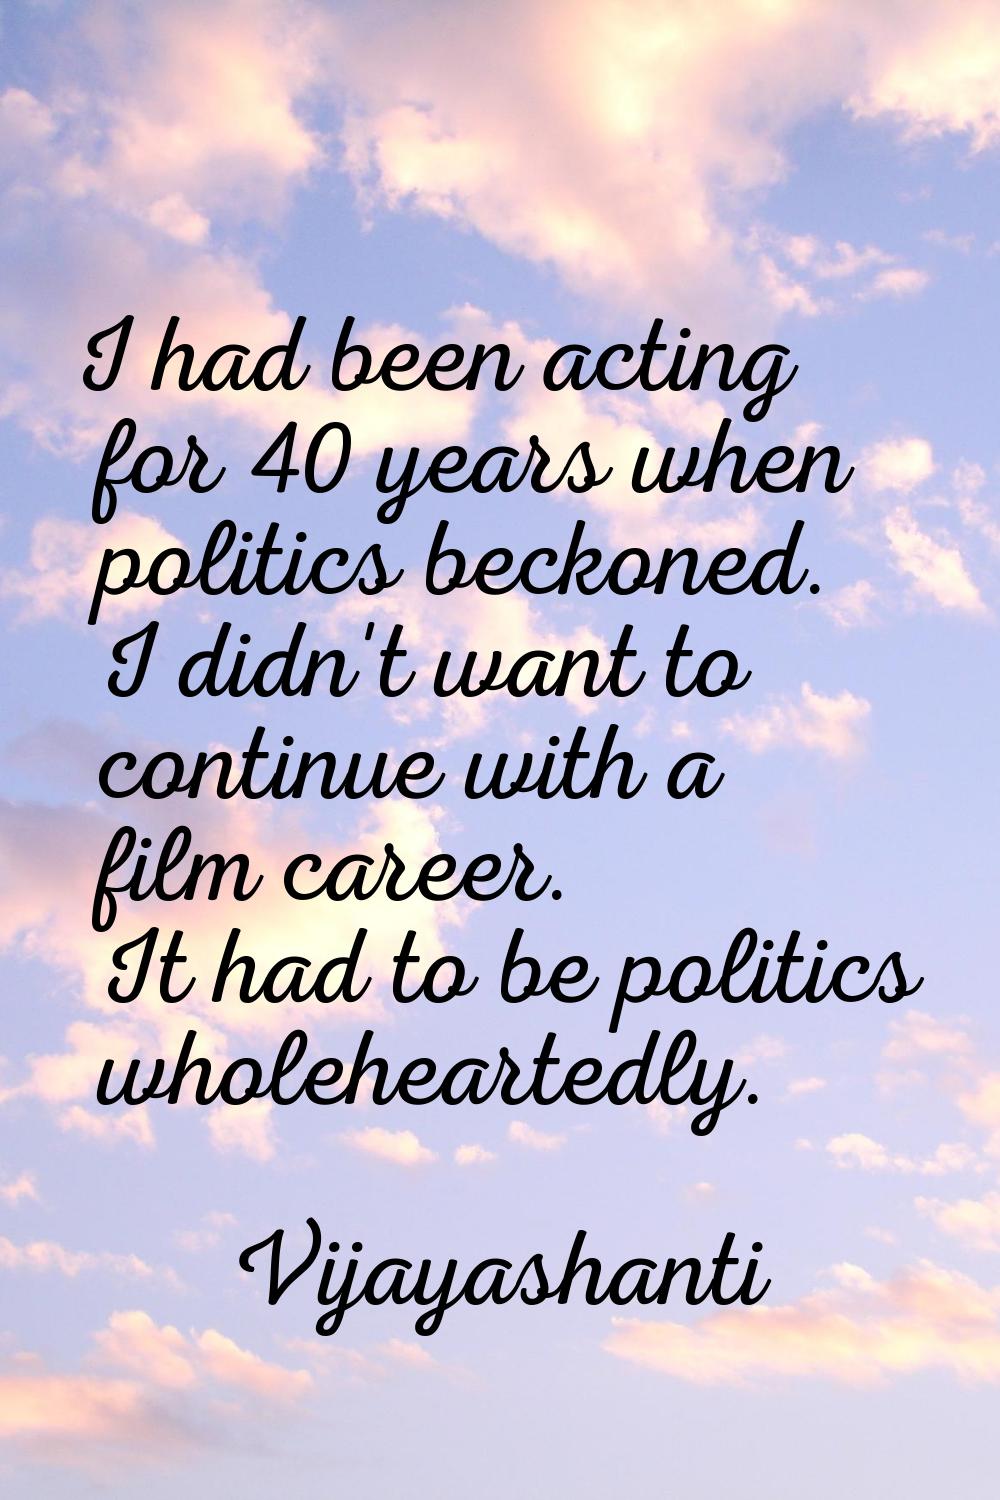 I had been acting for 40 years when politics beckoned. I didn't want to continue with a film career